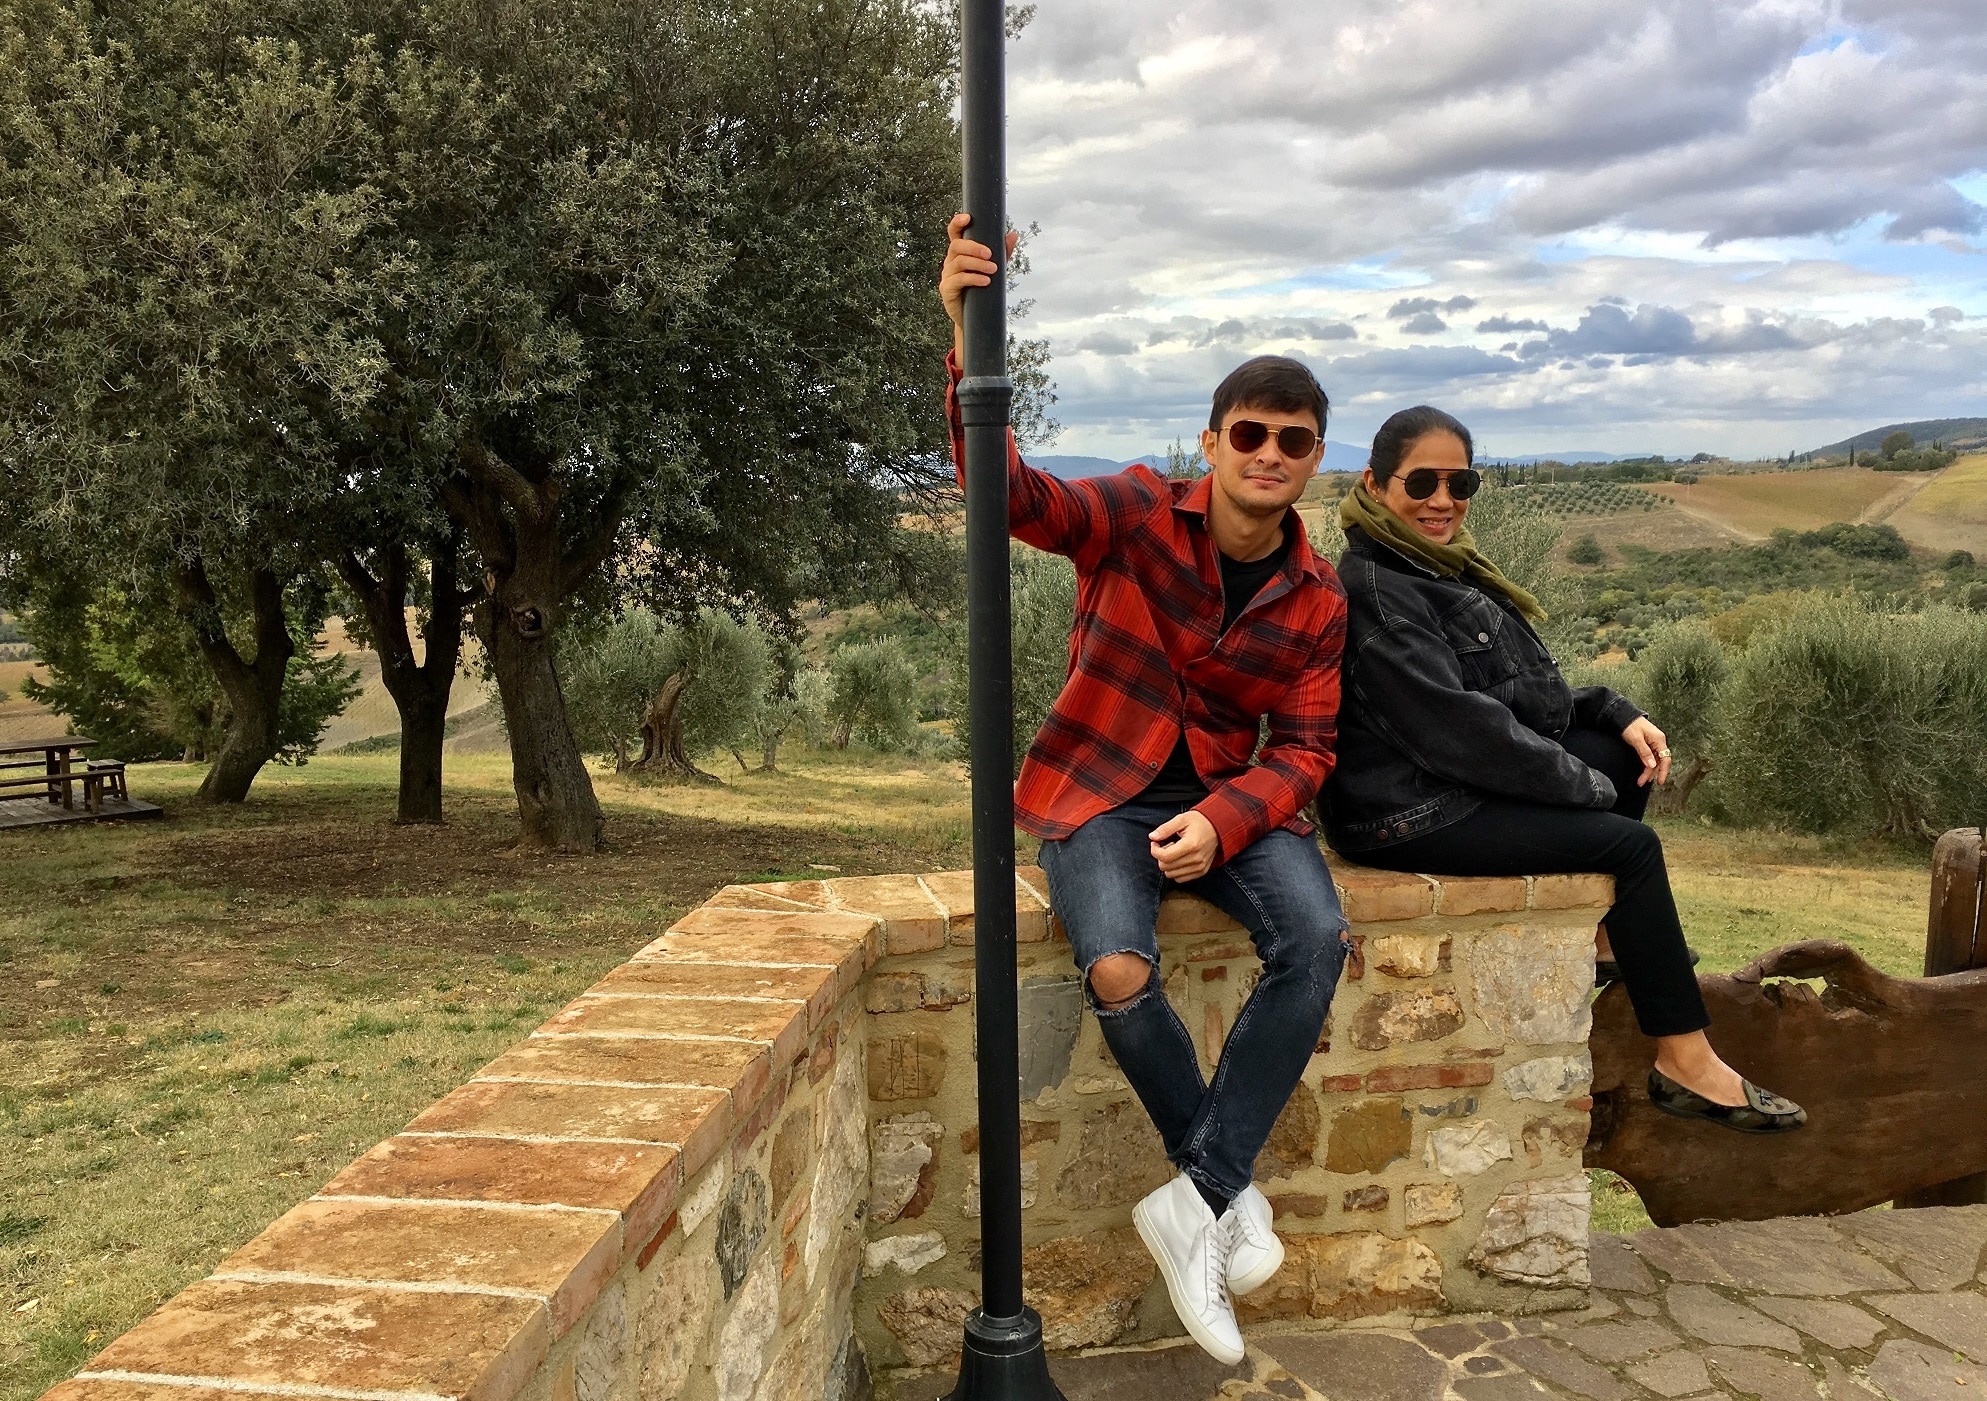 Matteo Guidicelli and Chef Margarita Fores in The Crawl Italy